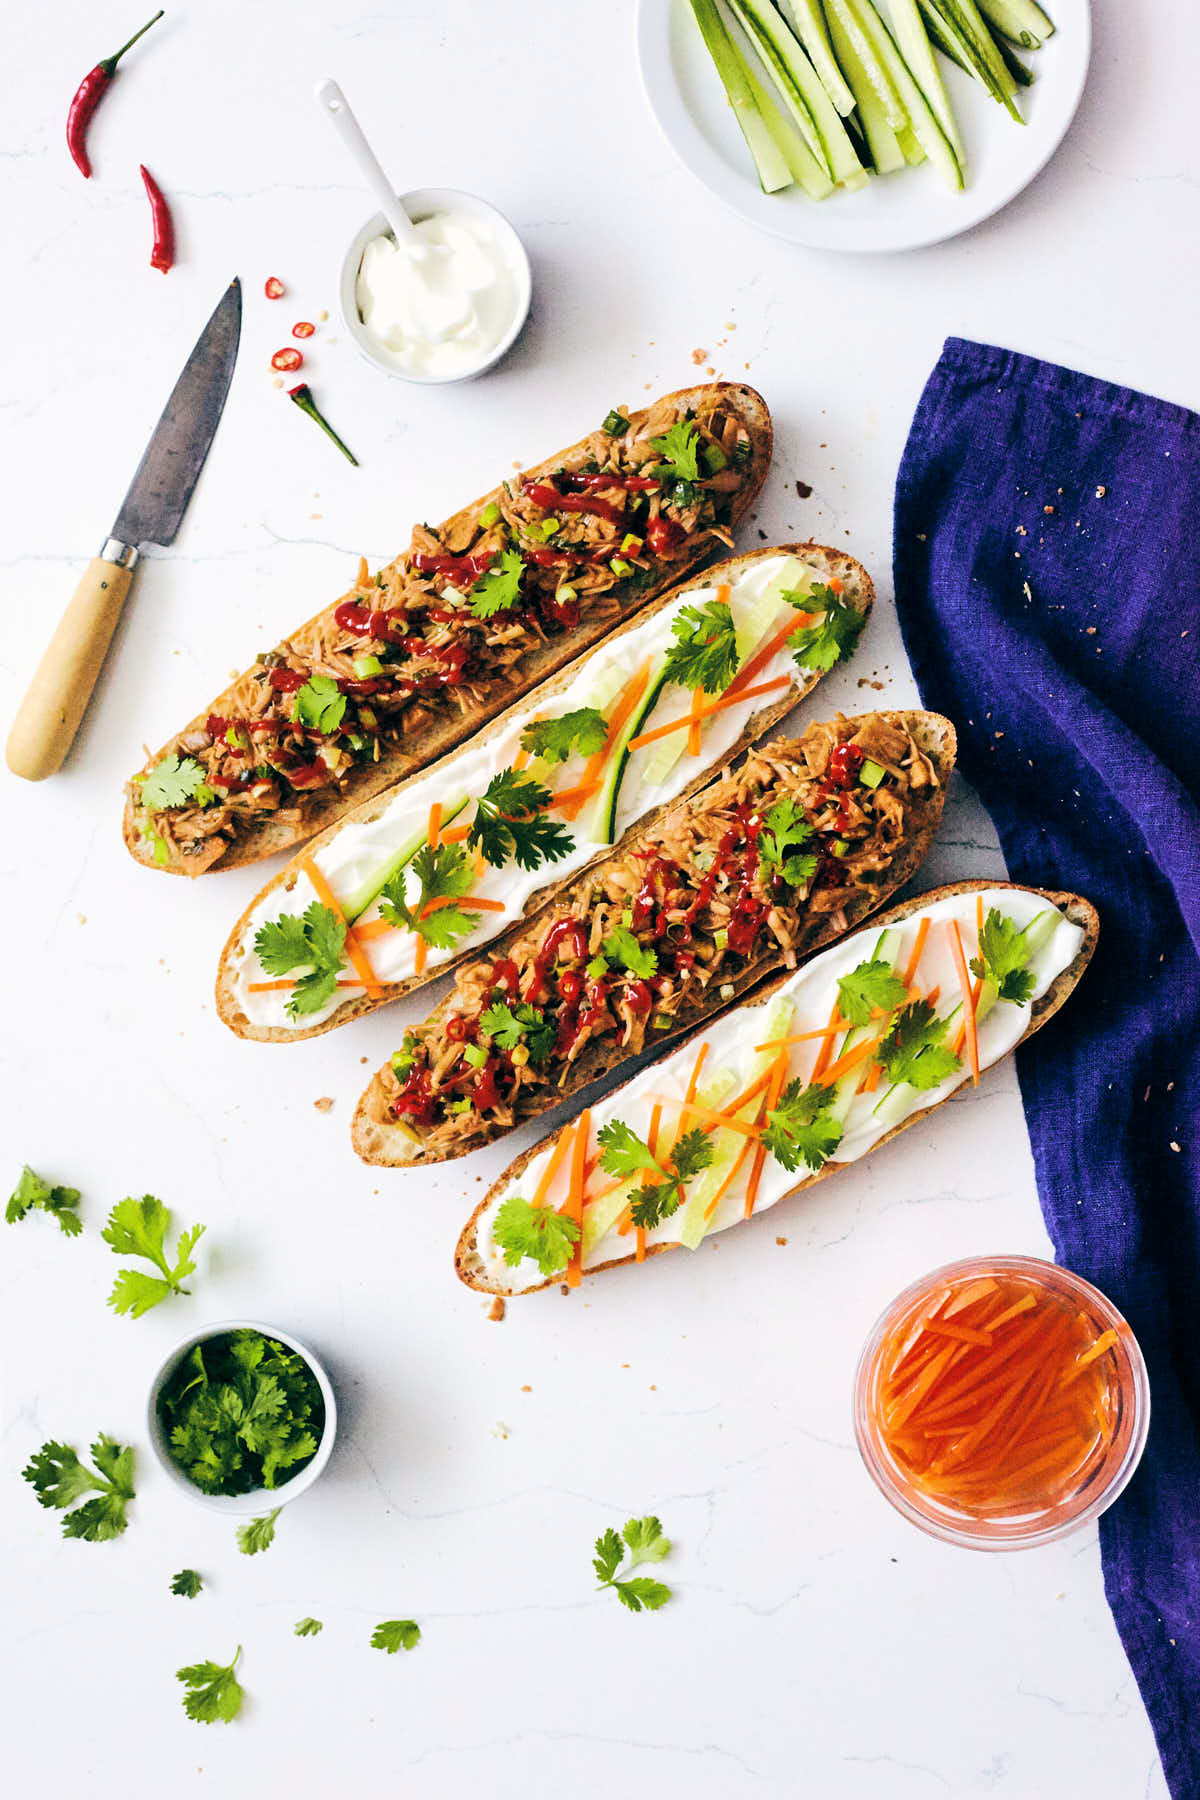 Two open-faced pulled jackfruit banh mi sandwiches on a marble counter ready to be enjoyed